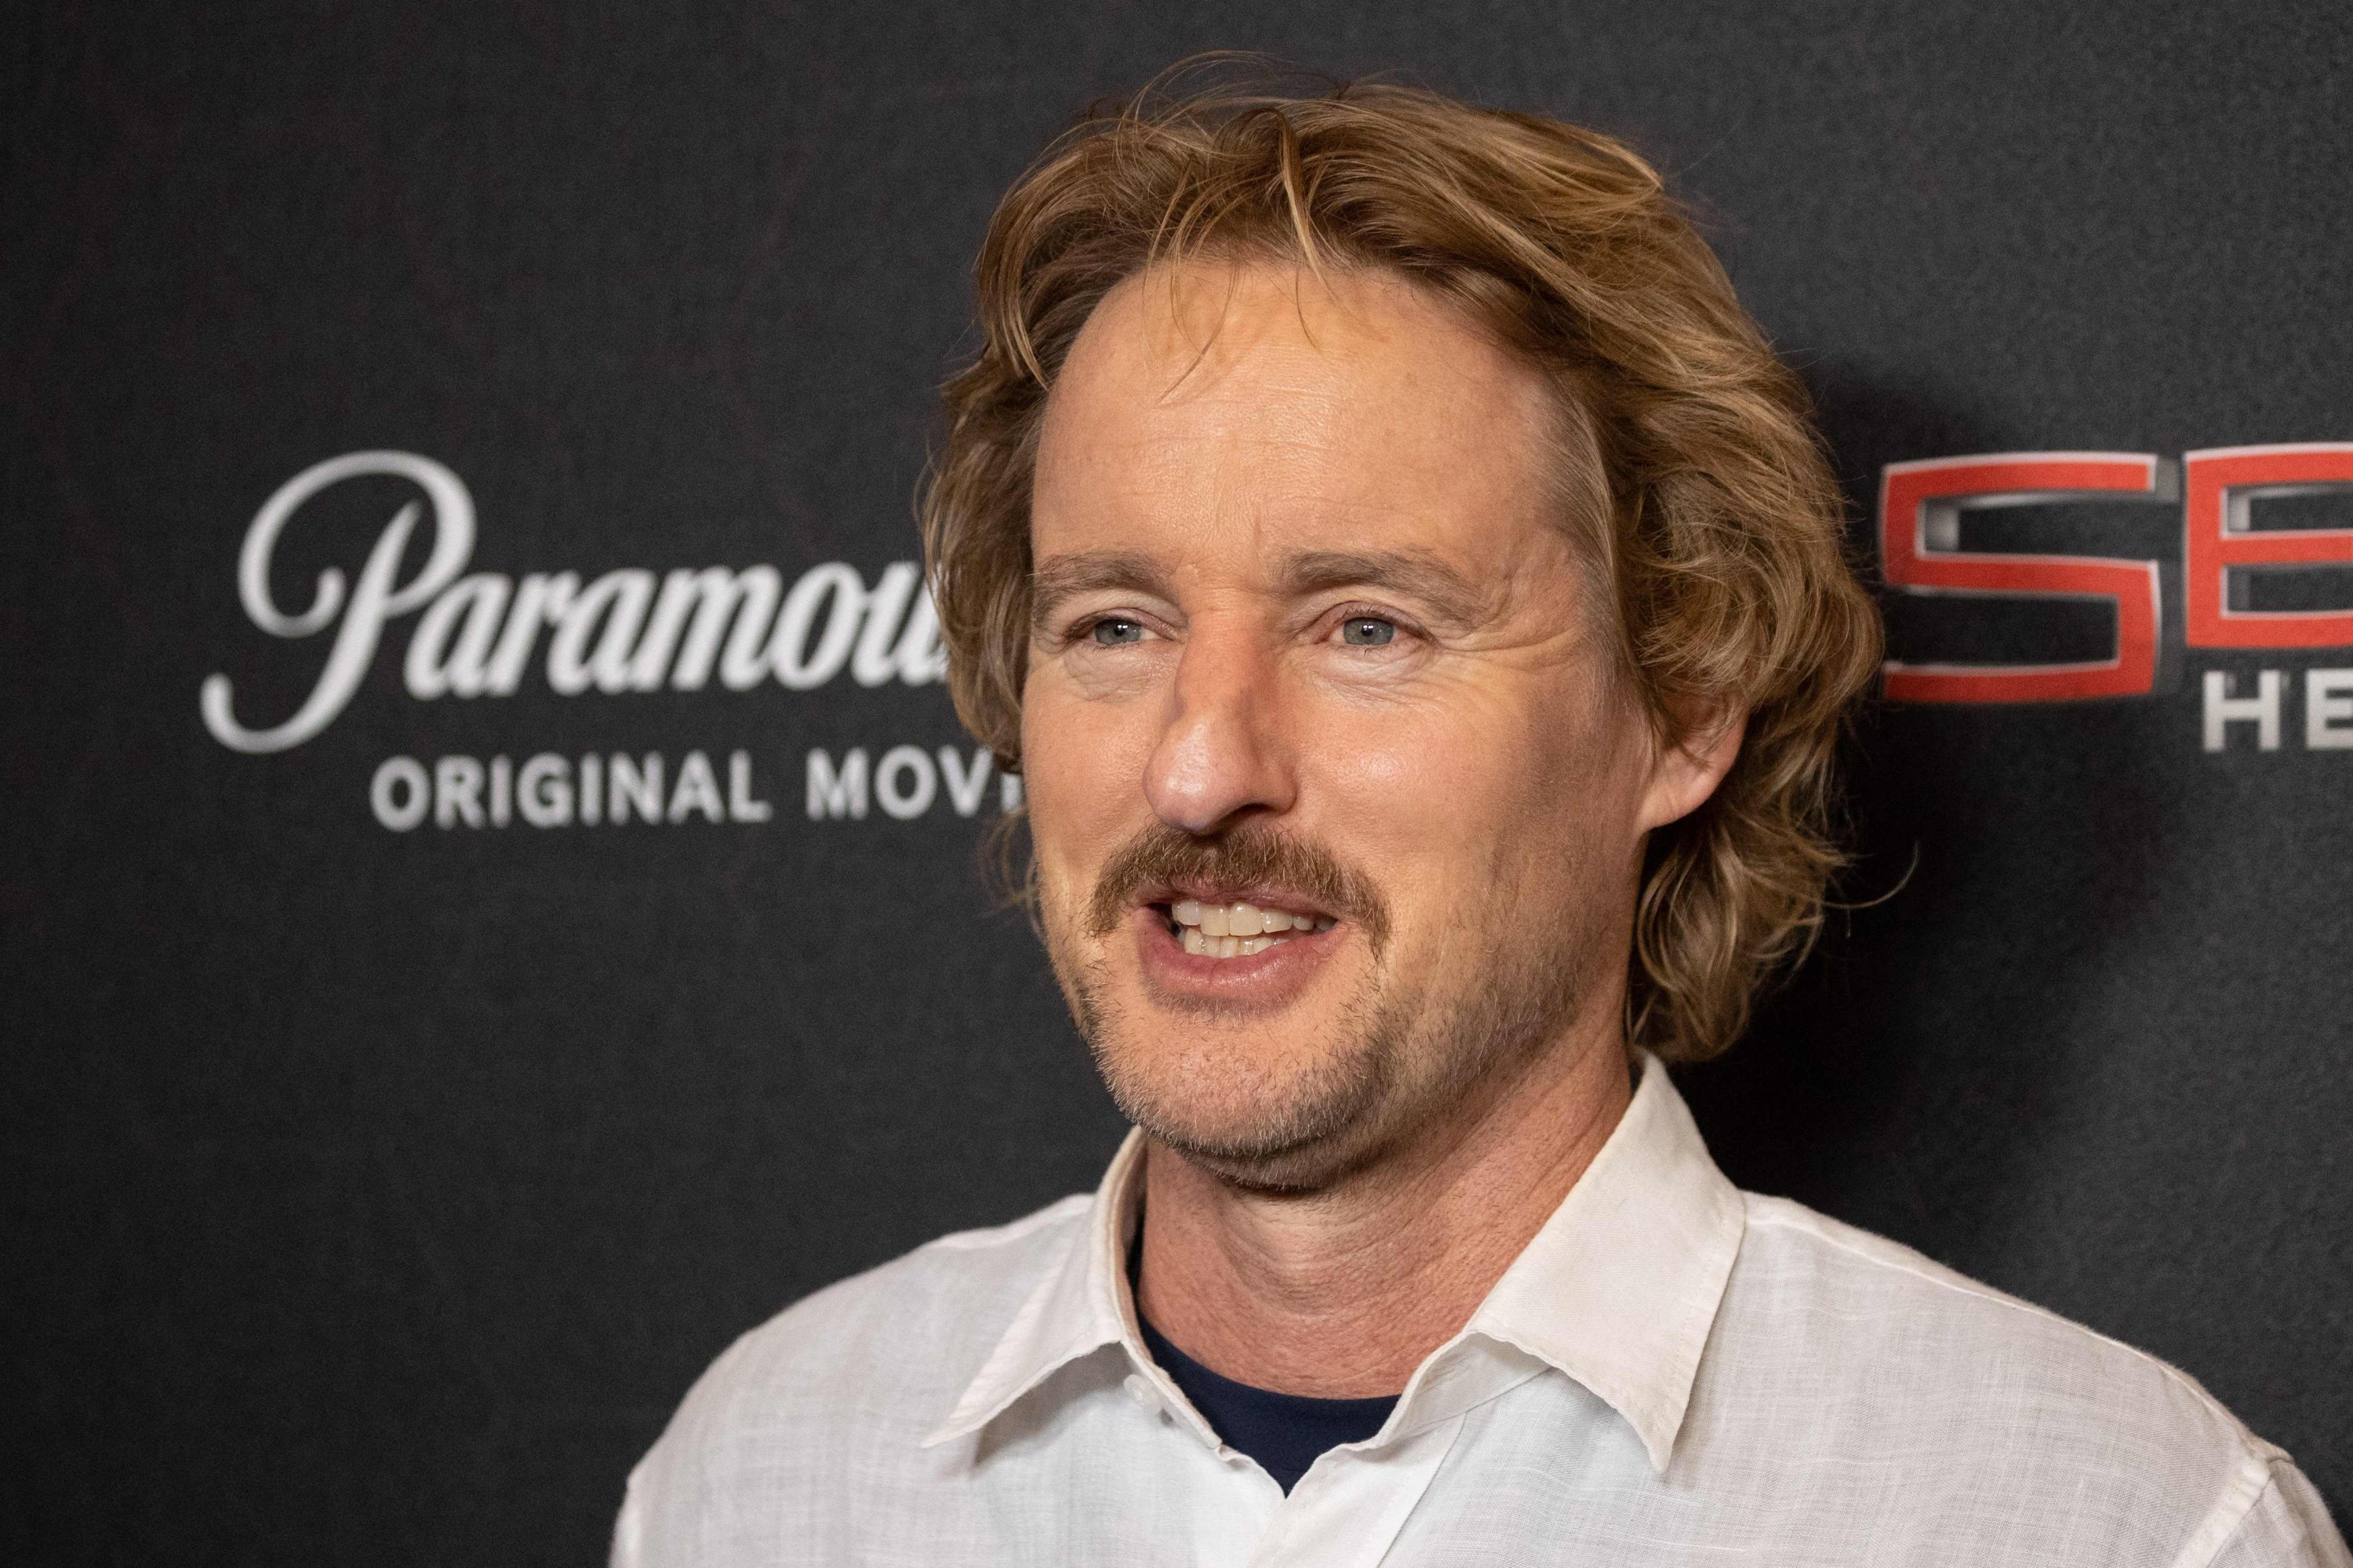 Owen Wilson's new superhero flick vies for youth appeal in streaming